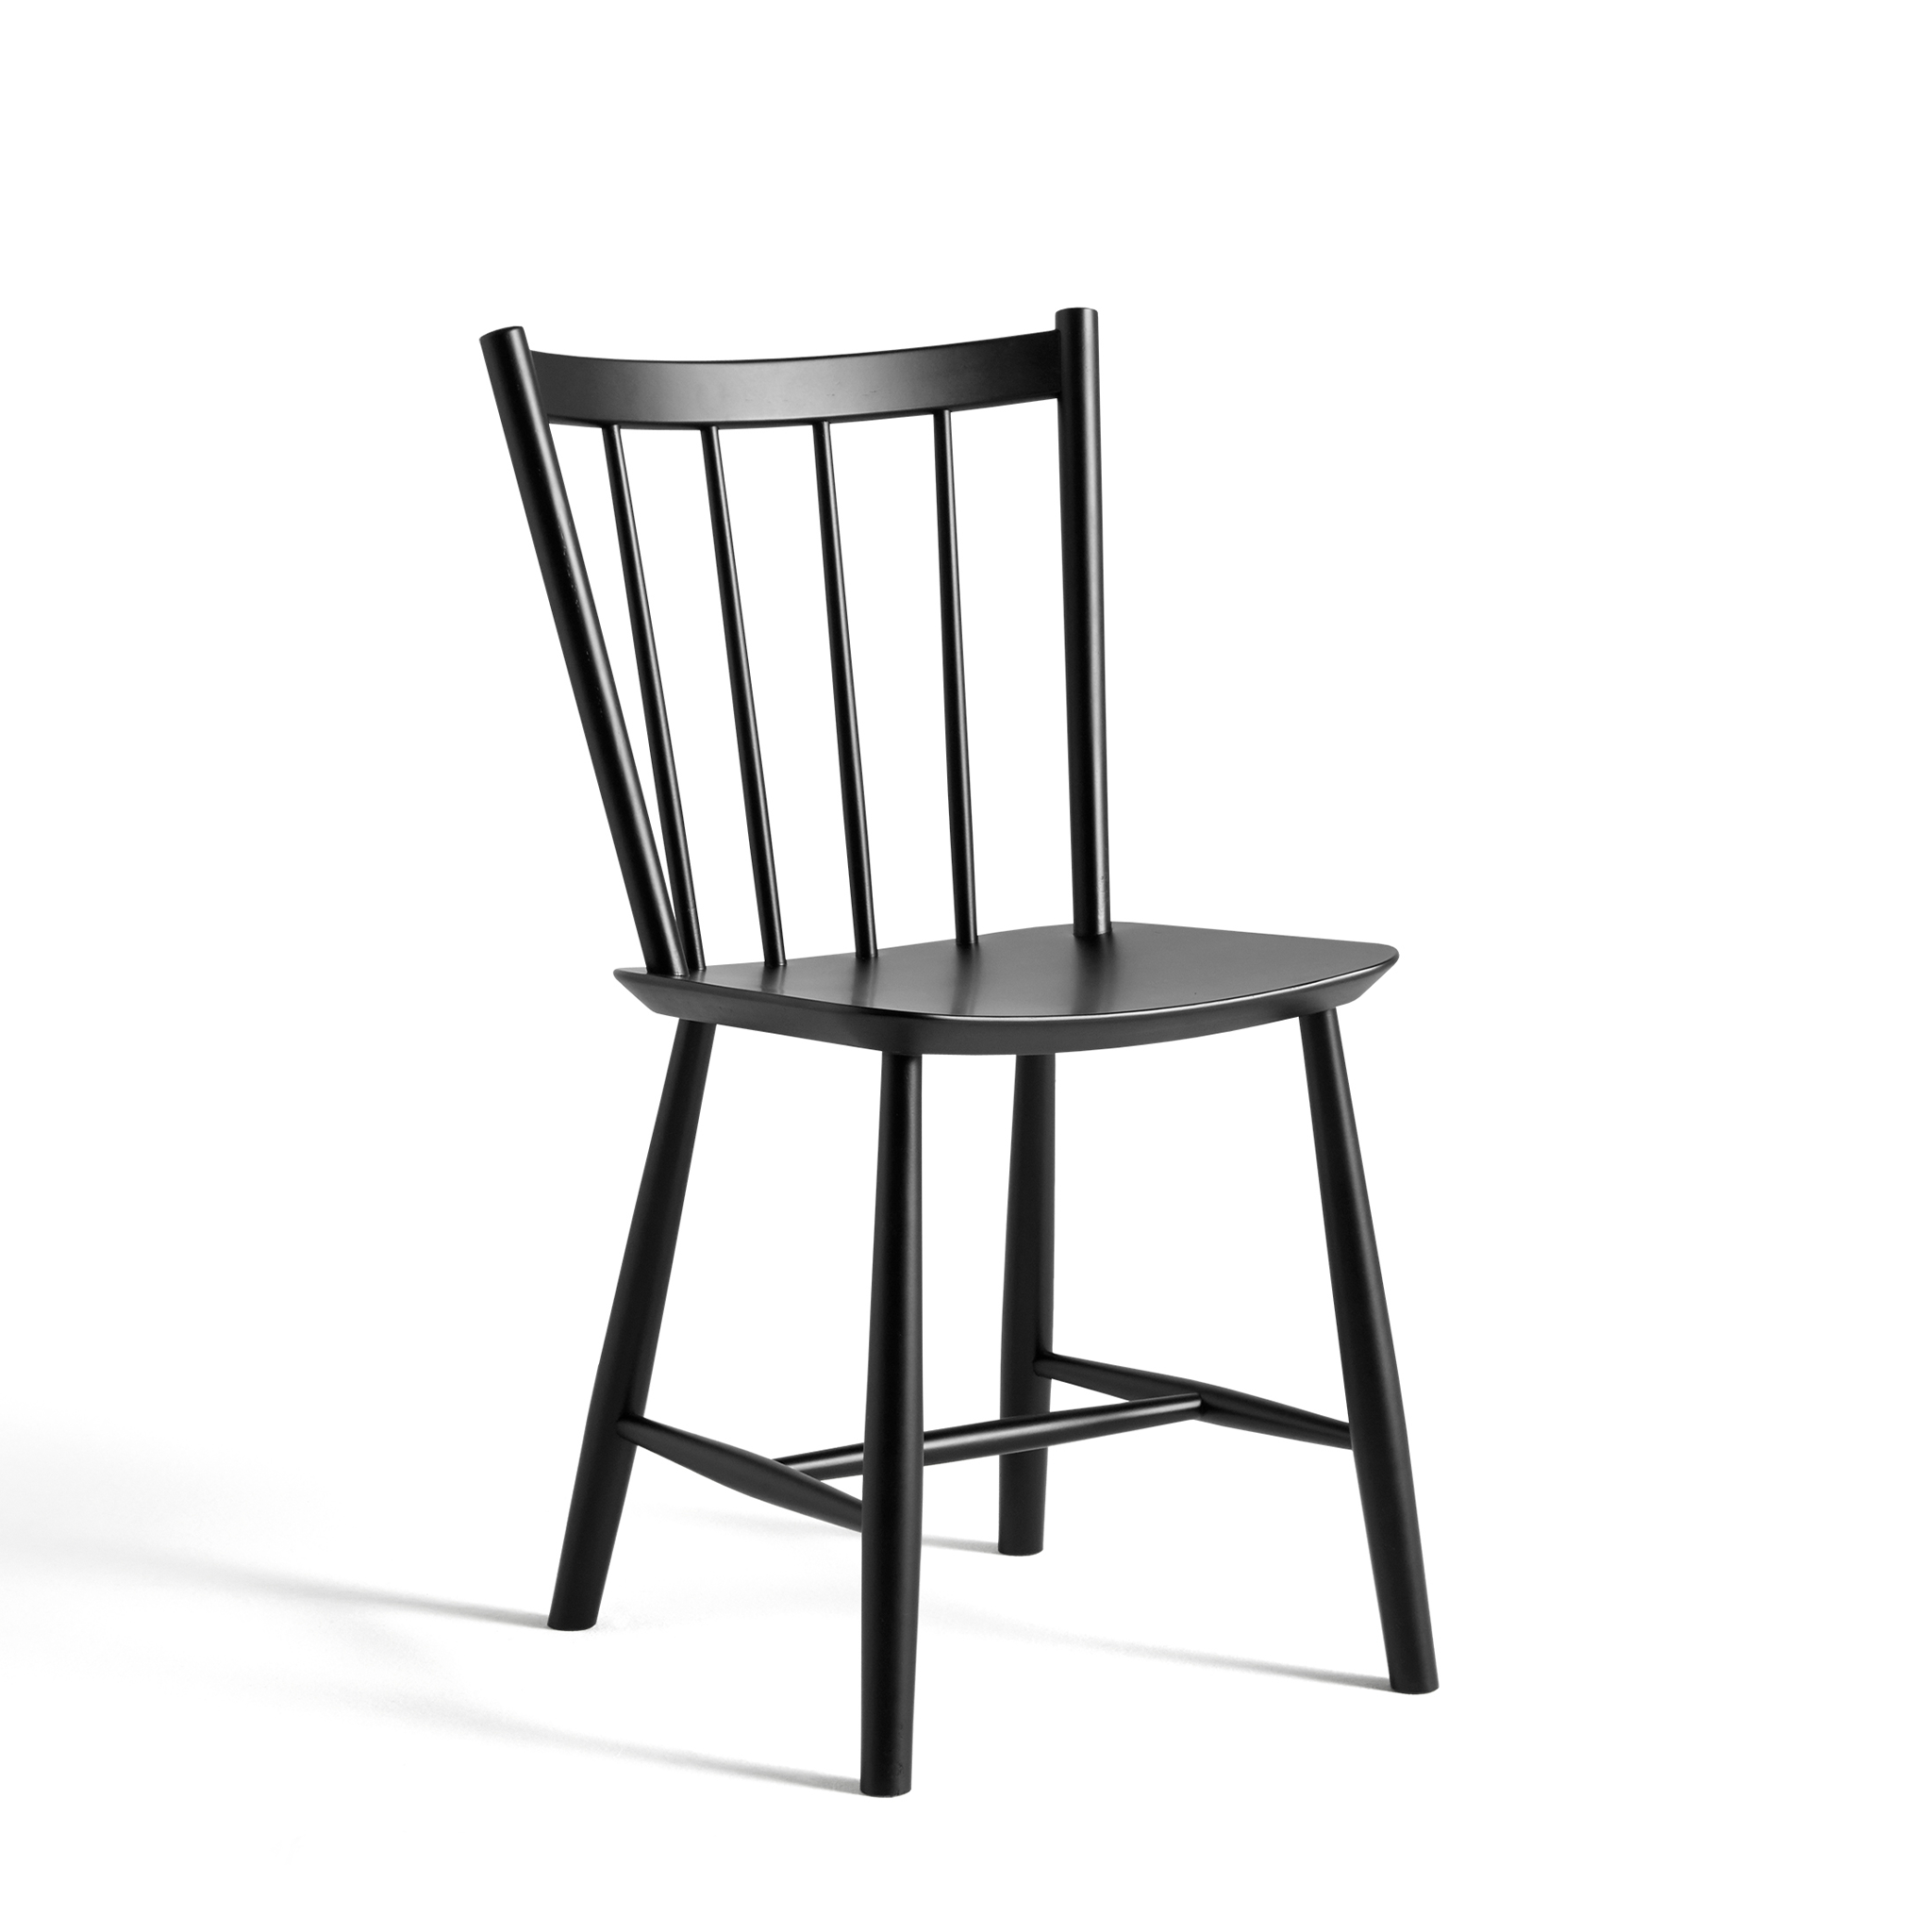 J41 Chair by Hay